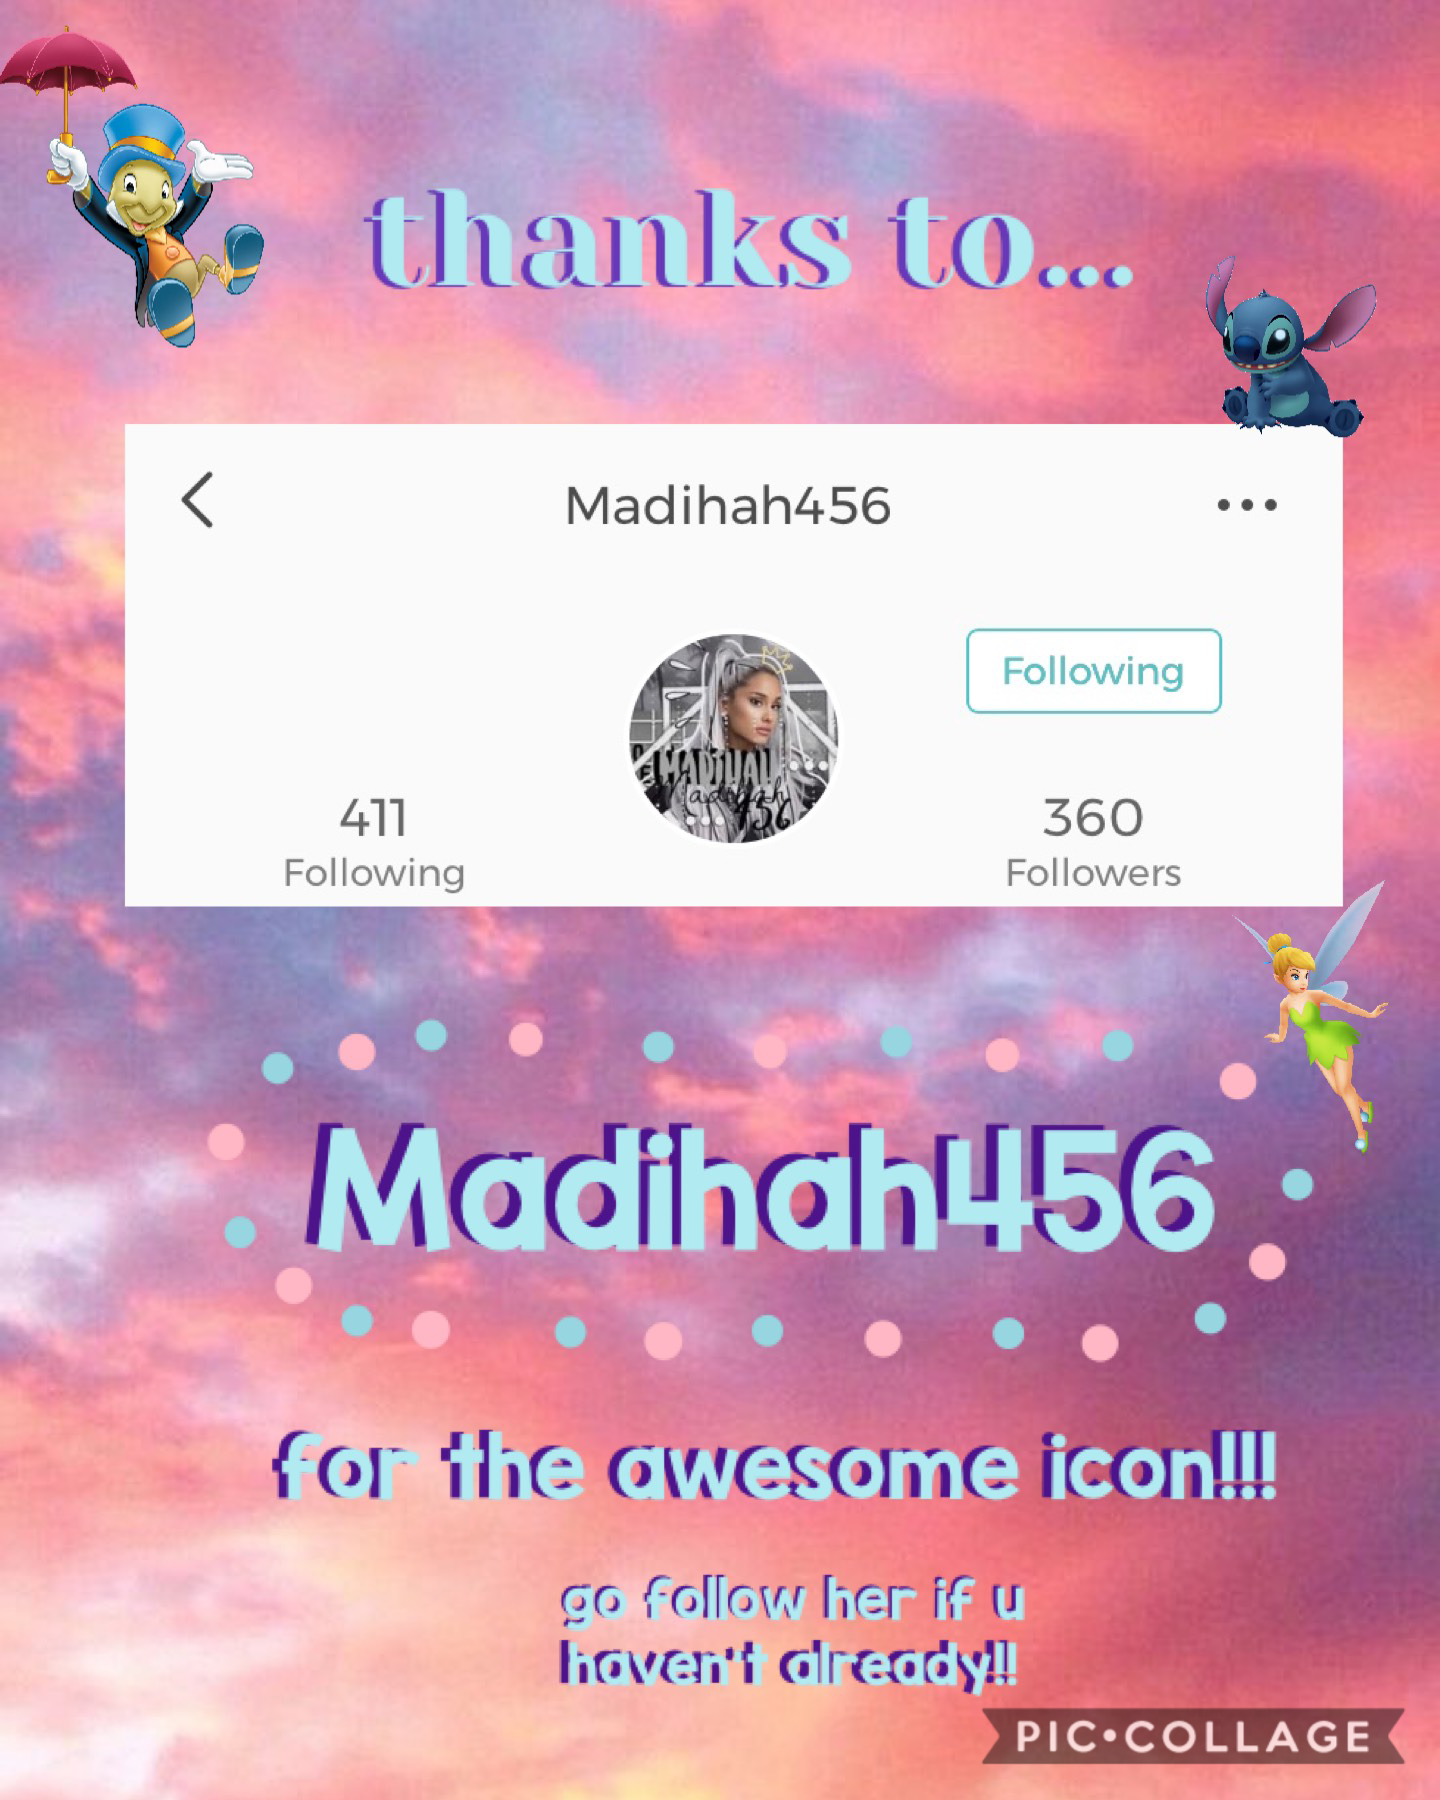 ⭐️ tap ⭐️

hey guys!!! so if u haven’t followed Madihah456 yet u rly should because she is super talented and super nice. Also here’s a little secret... I am @emoji_addict 🤫 and if u don’t believe me... i’ll try and prove it to u just lmk... welp, i hope 